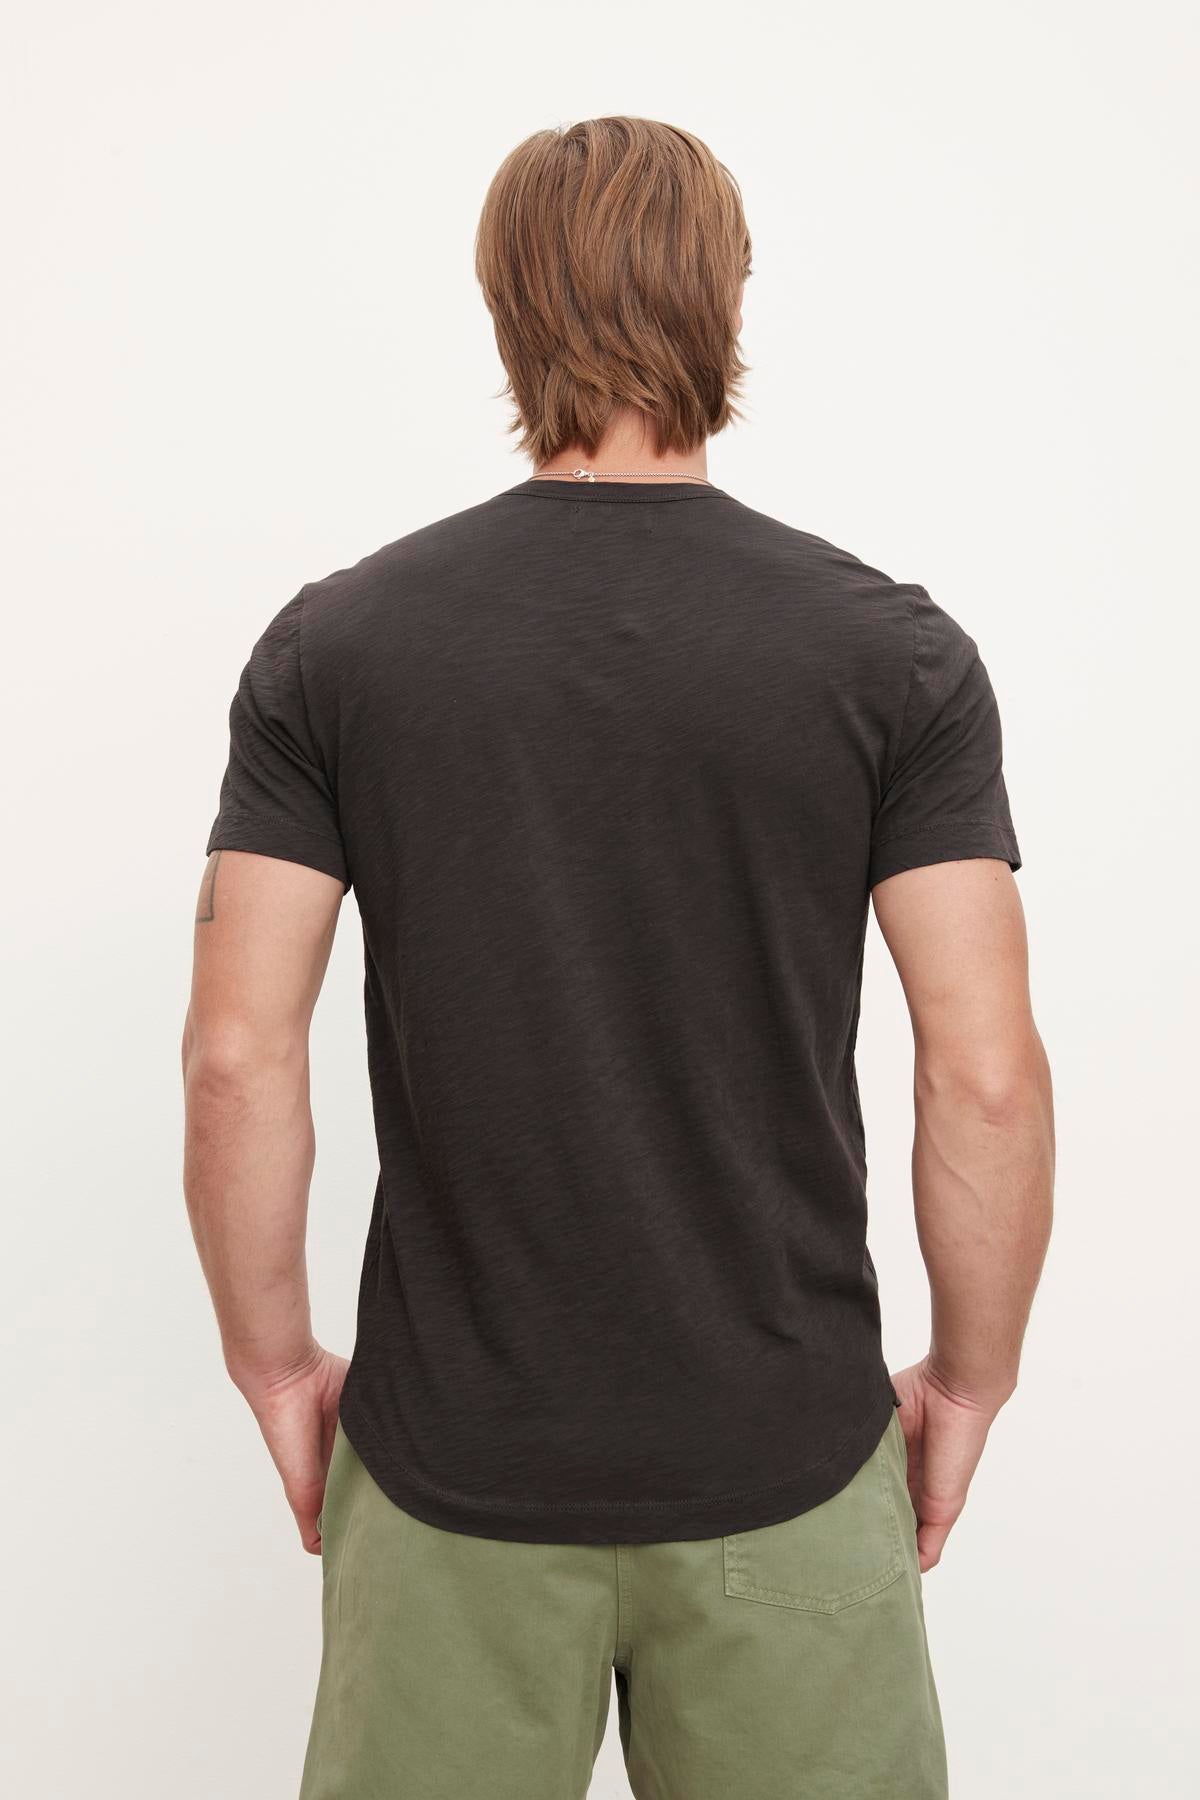 Man standing with his back to the camera wearing a dark, slub knit AMARO TEE by Velvet by Graham & Spencer and green pants.-36299660165313